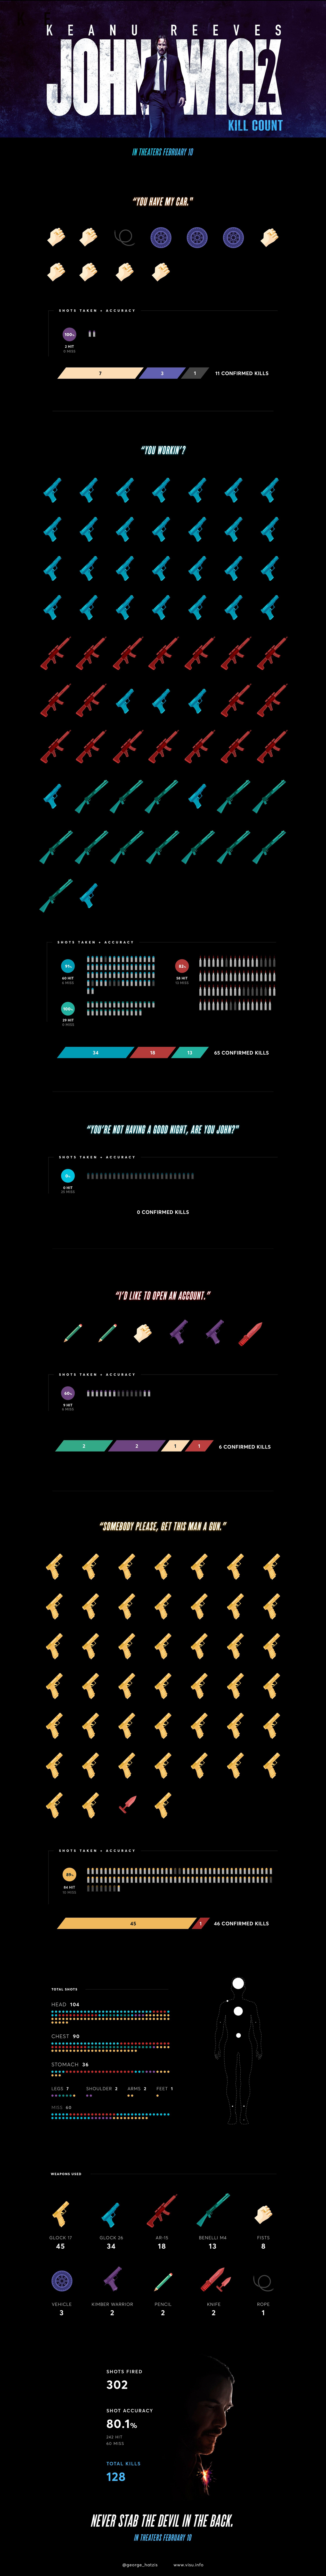 John Wick Chapter 2 Infographic